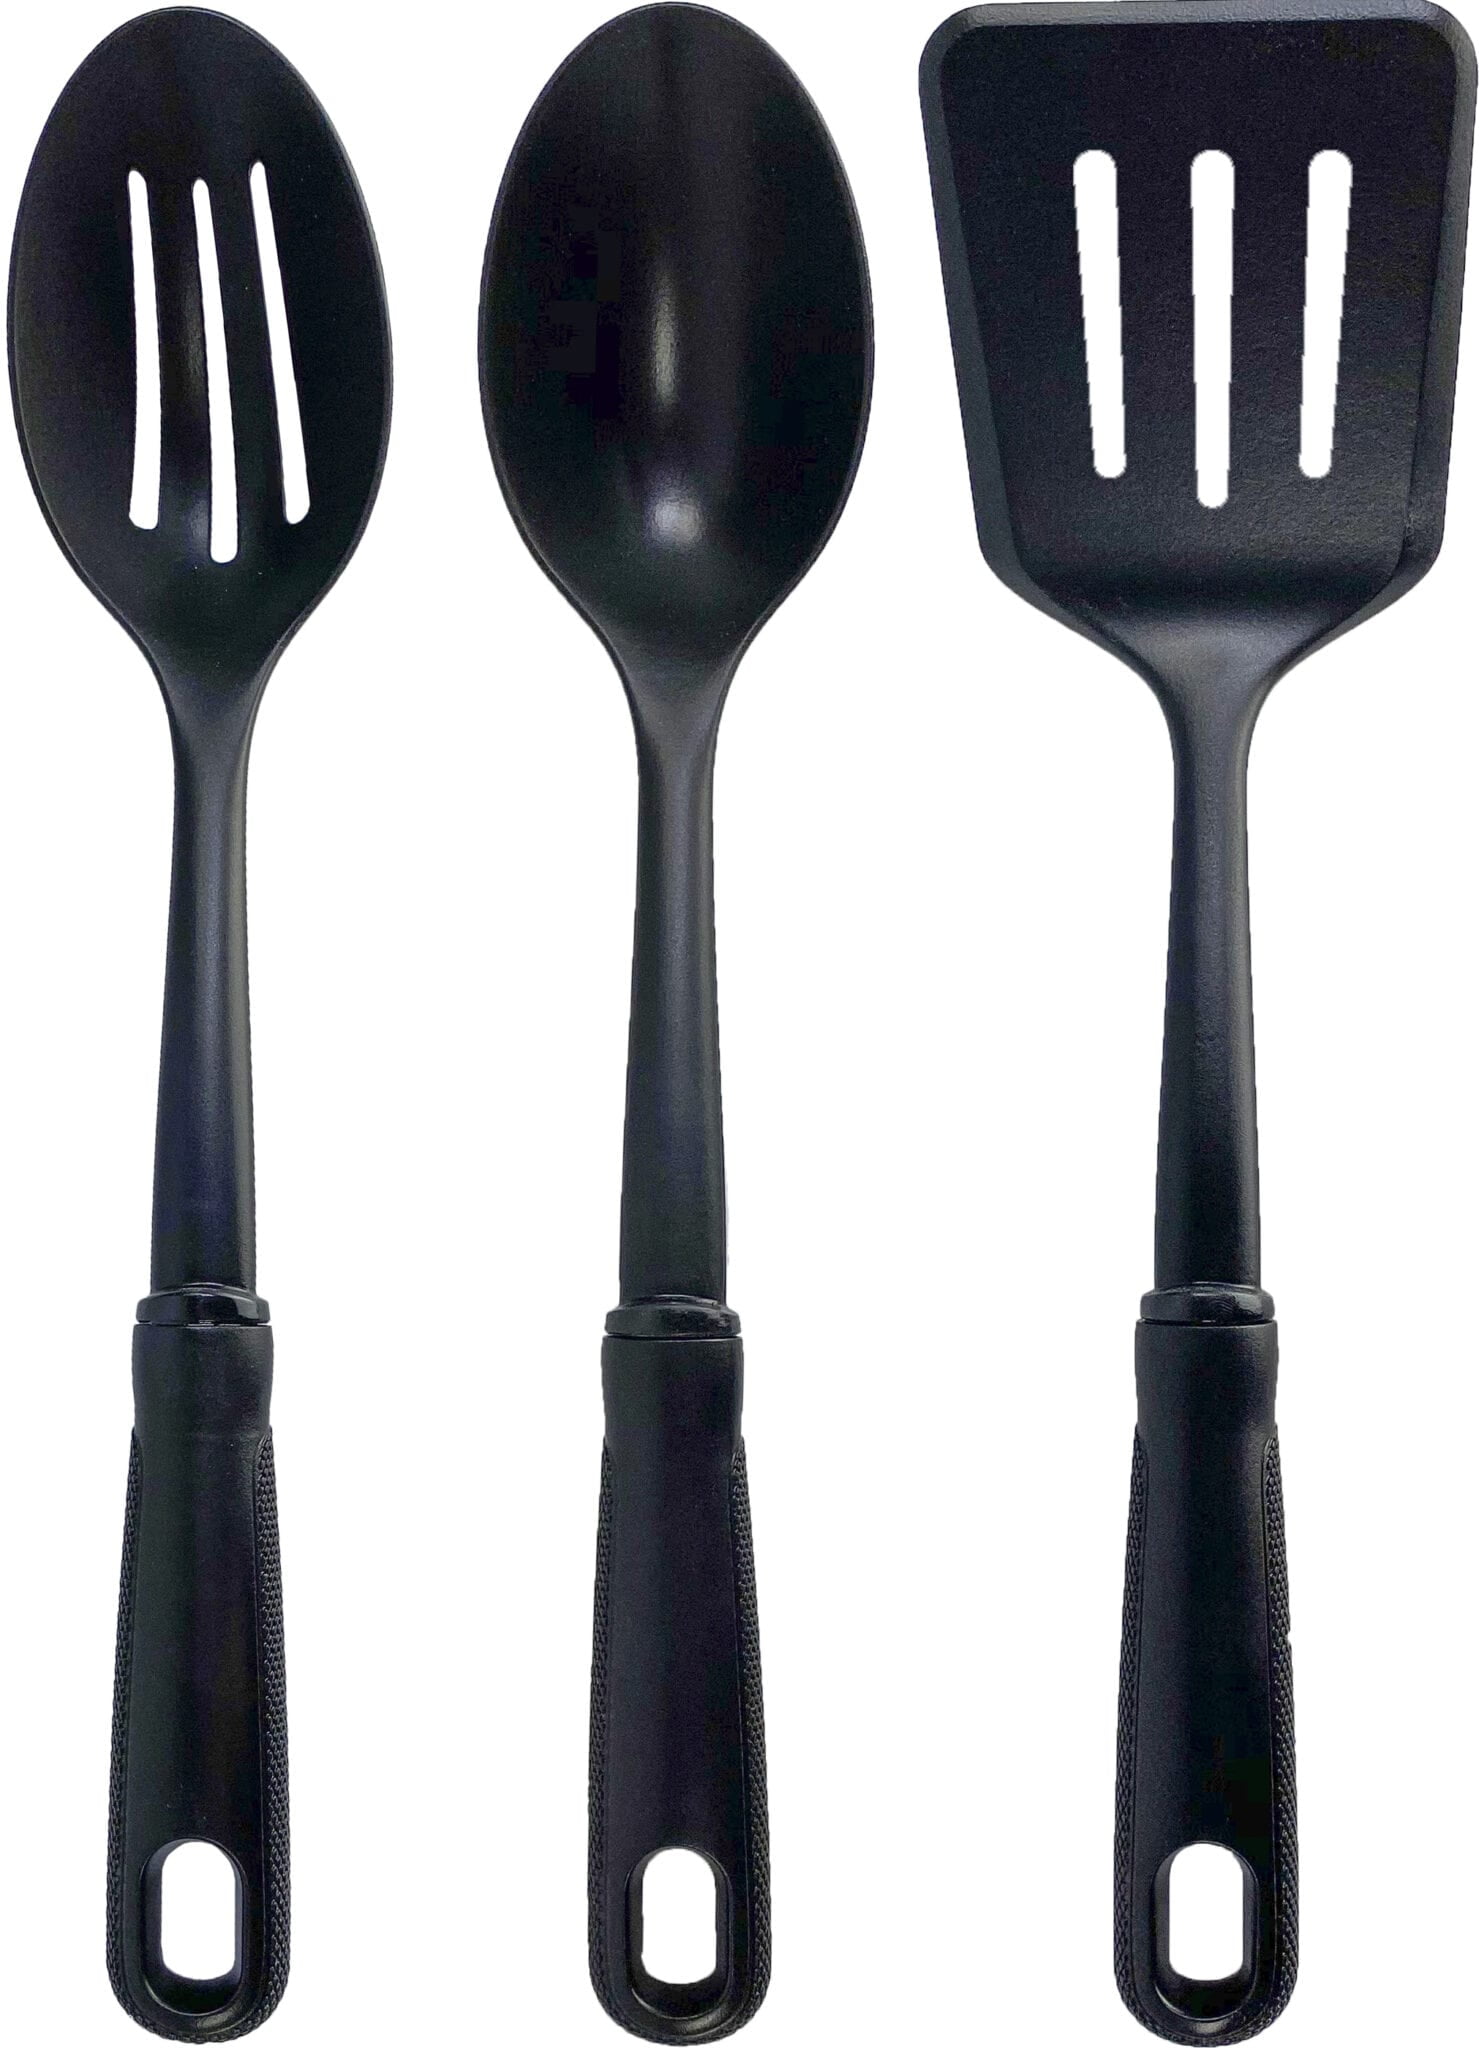 Mainstays 3-Piece Kitchen Utensil Set, Slotted Spatula, Slotted Spoon and Solid Spoon, Black, Nylon